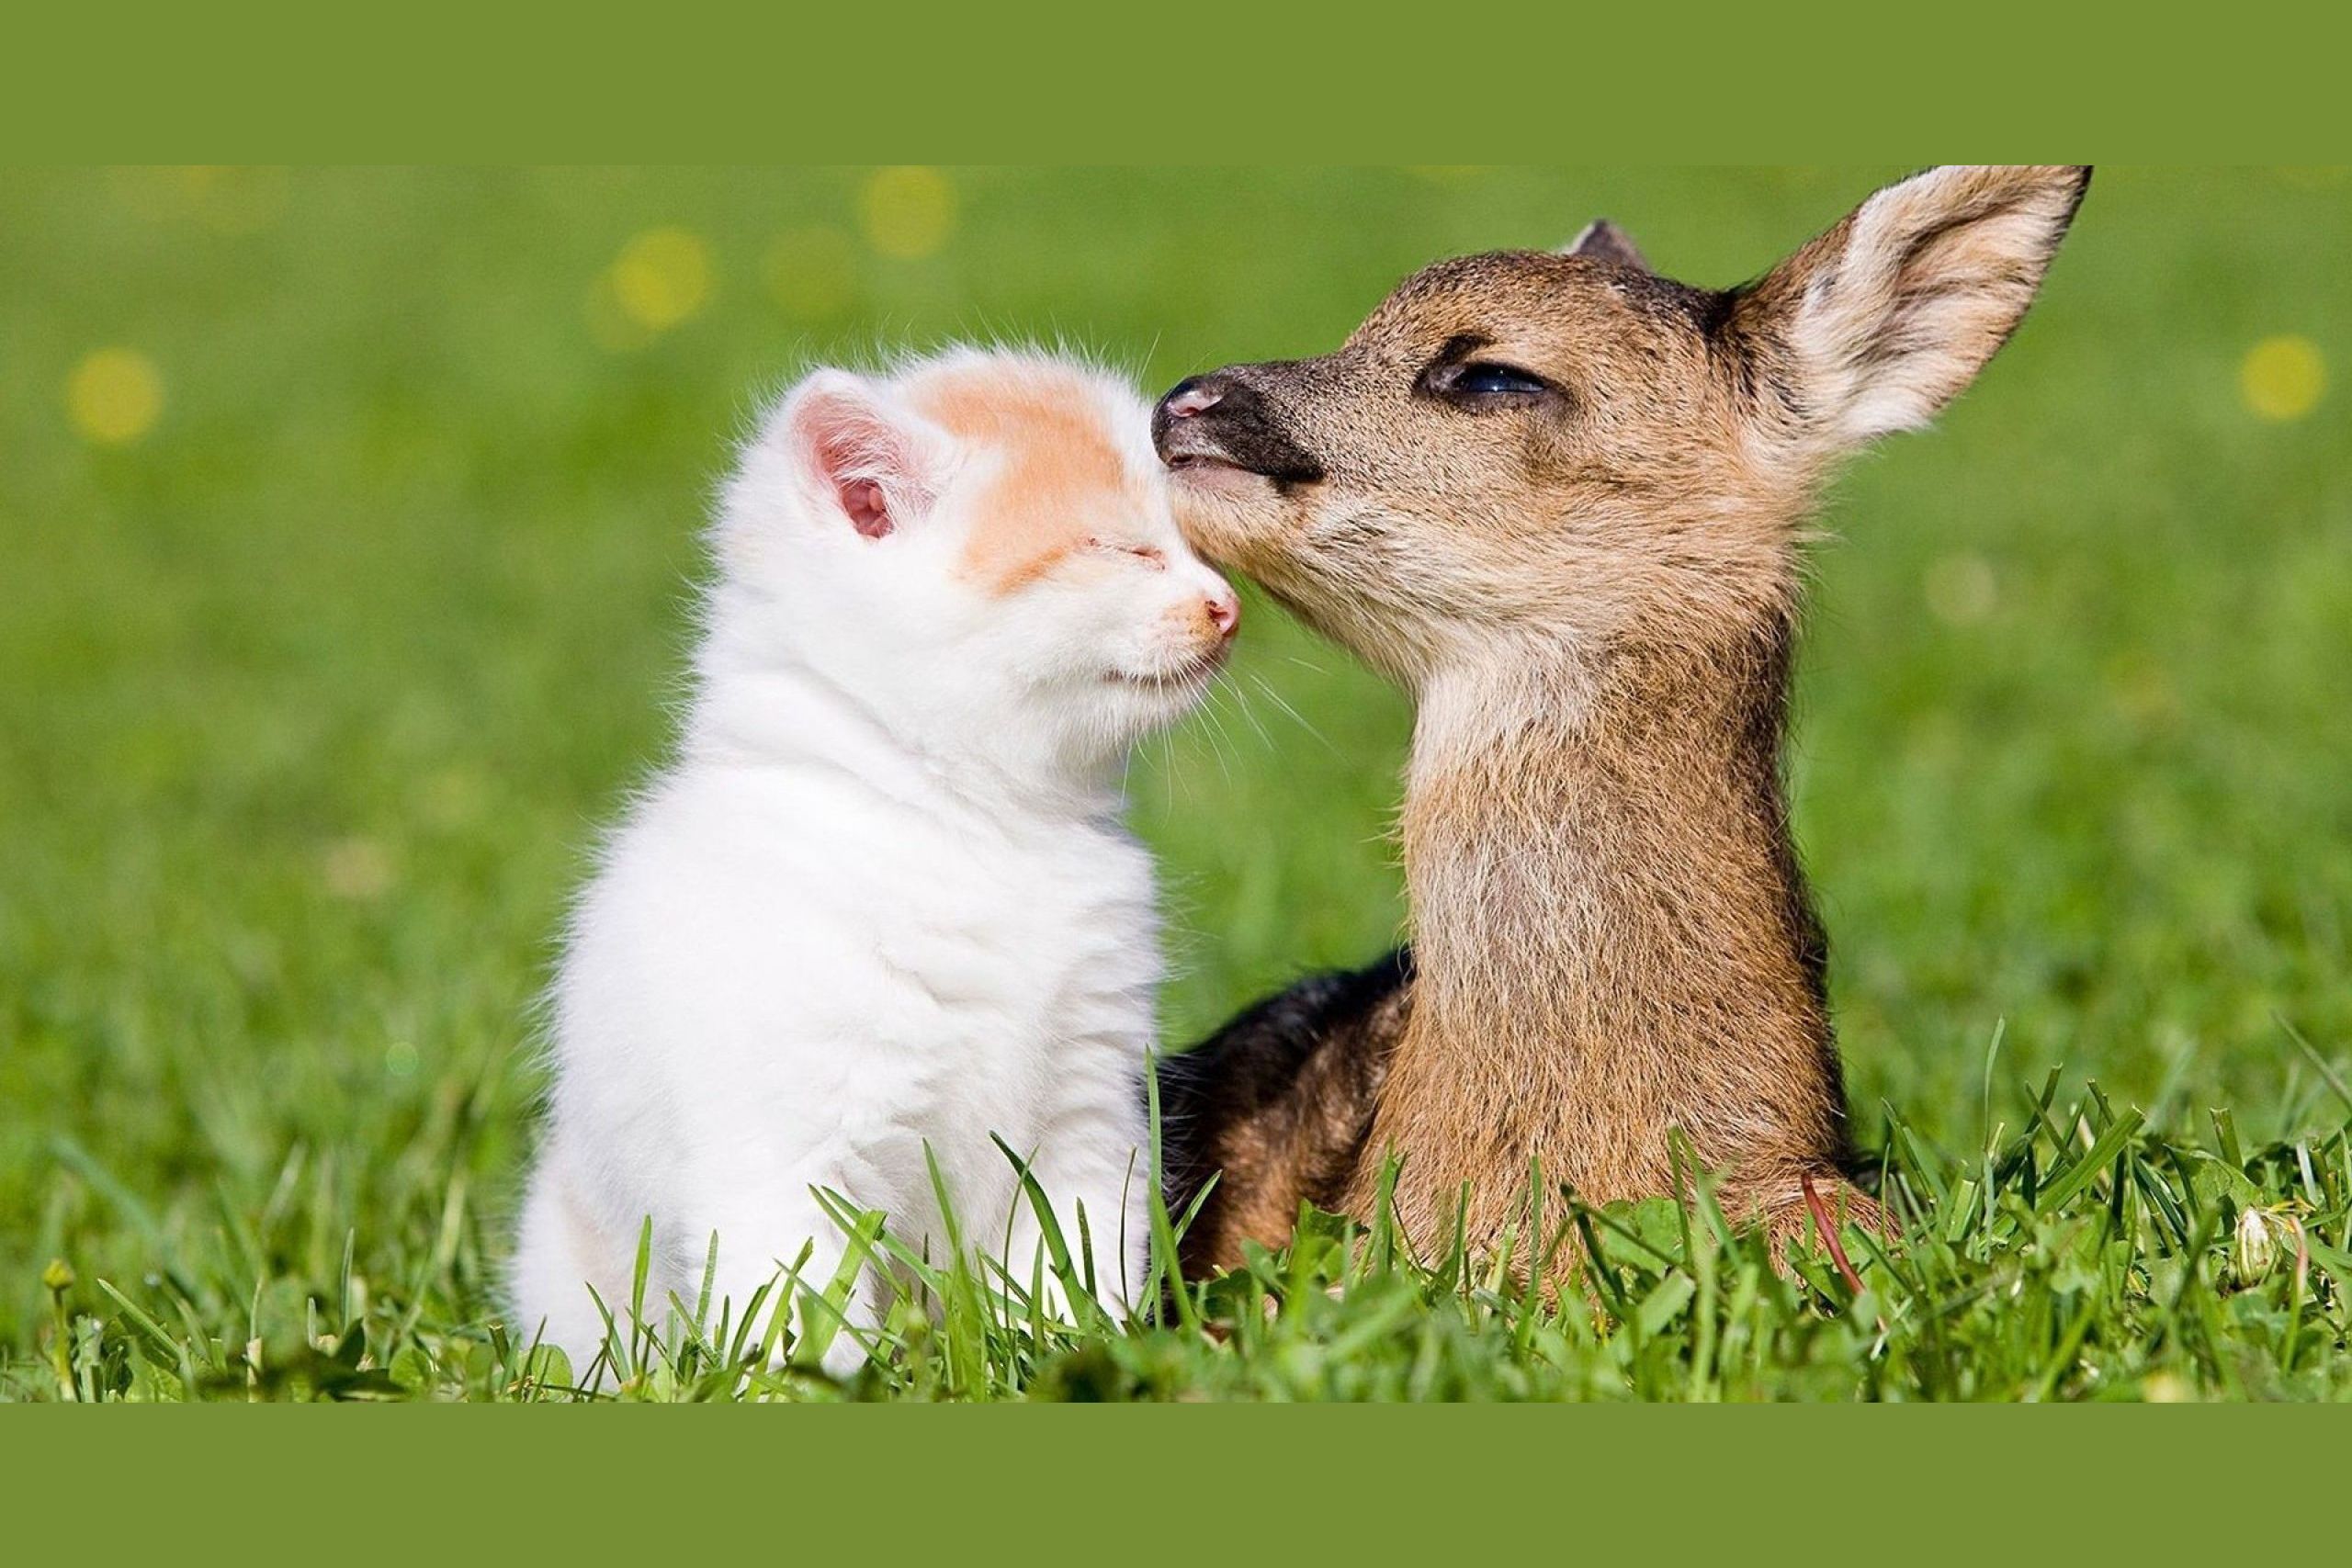 Which Quirky Animal Couple Are You and Your Partner?